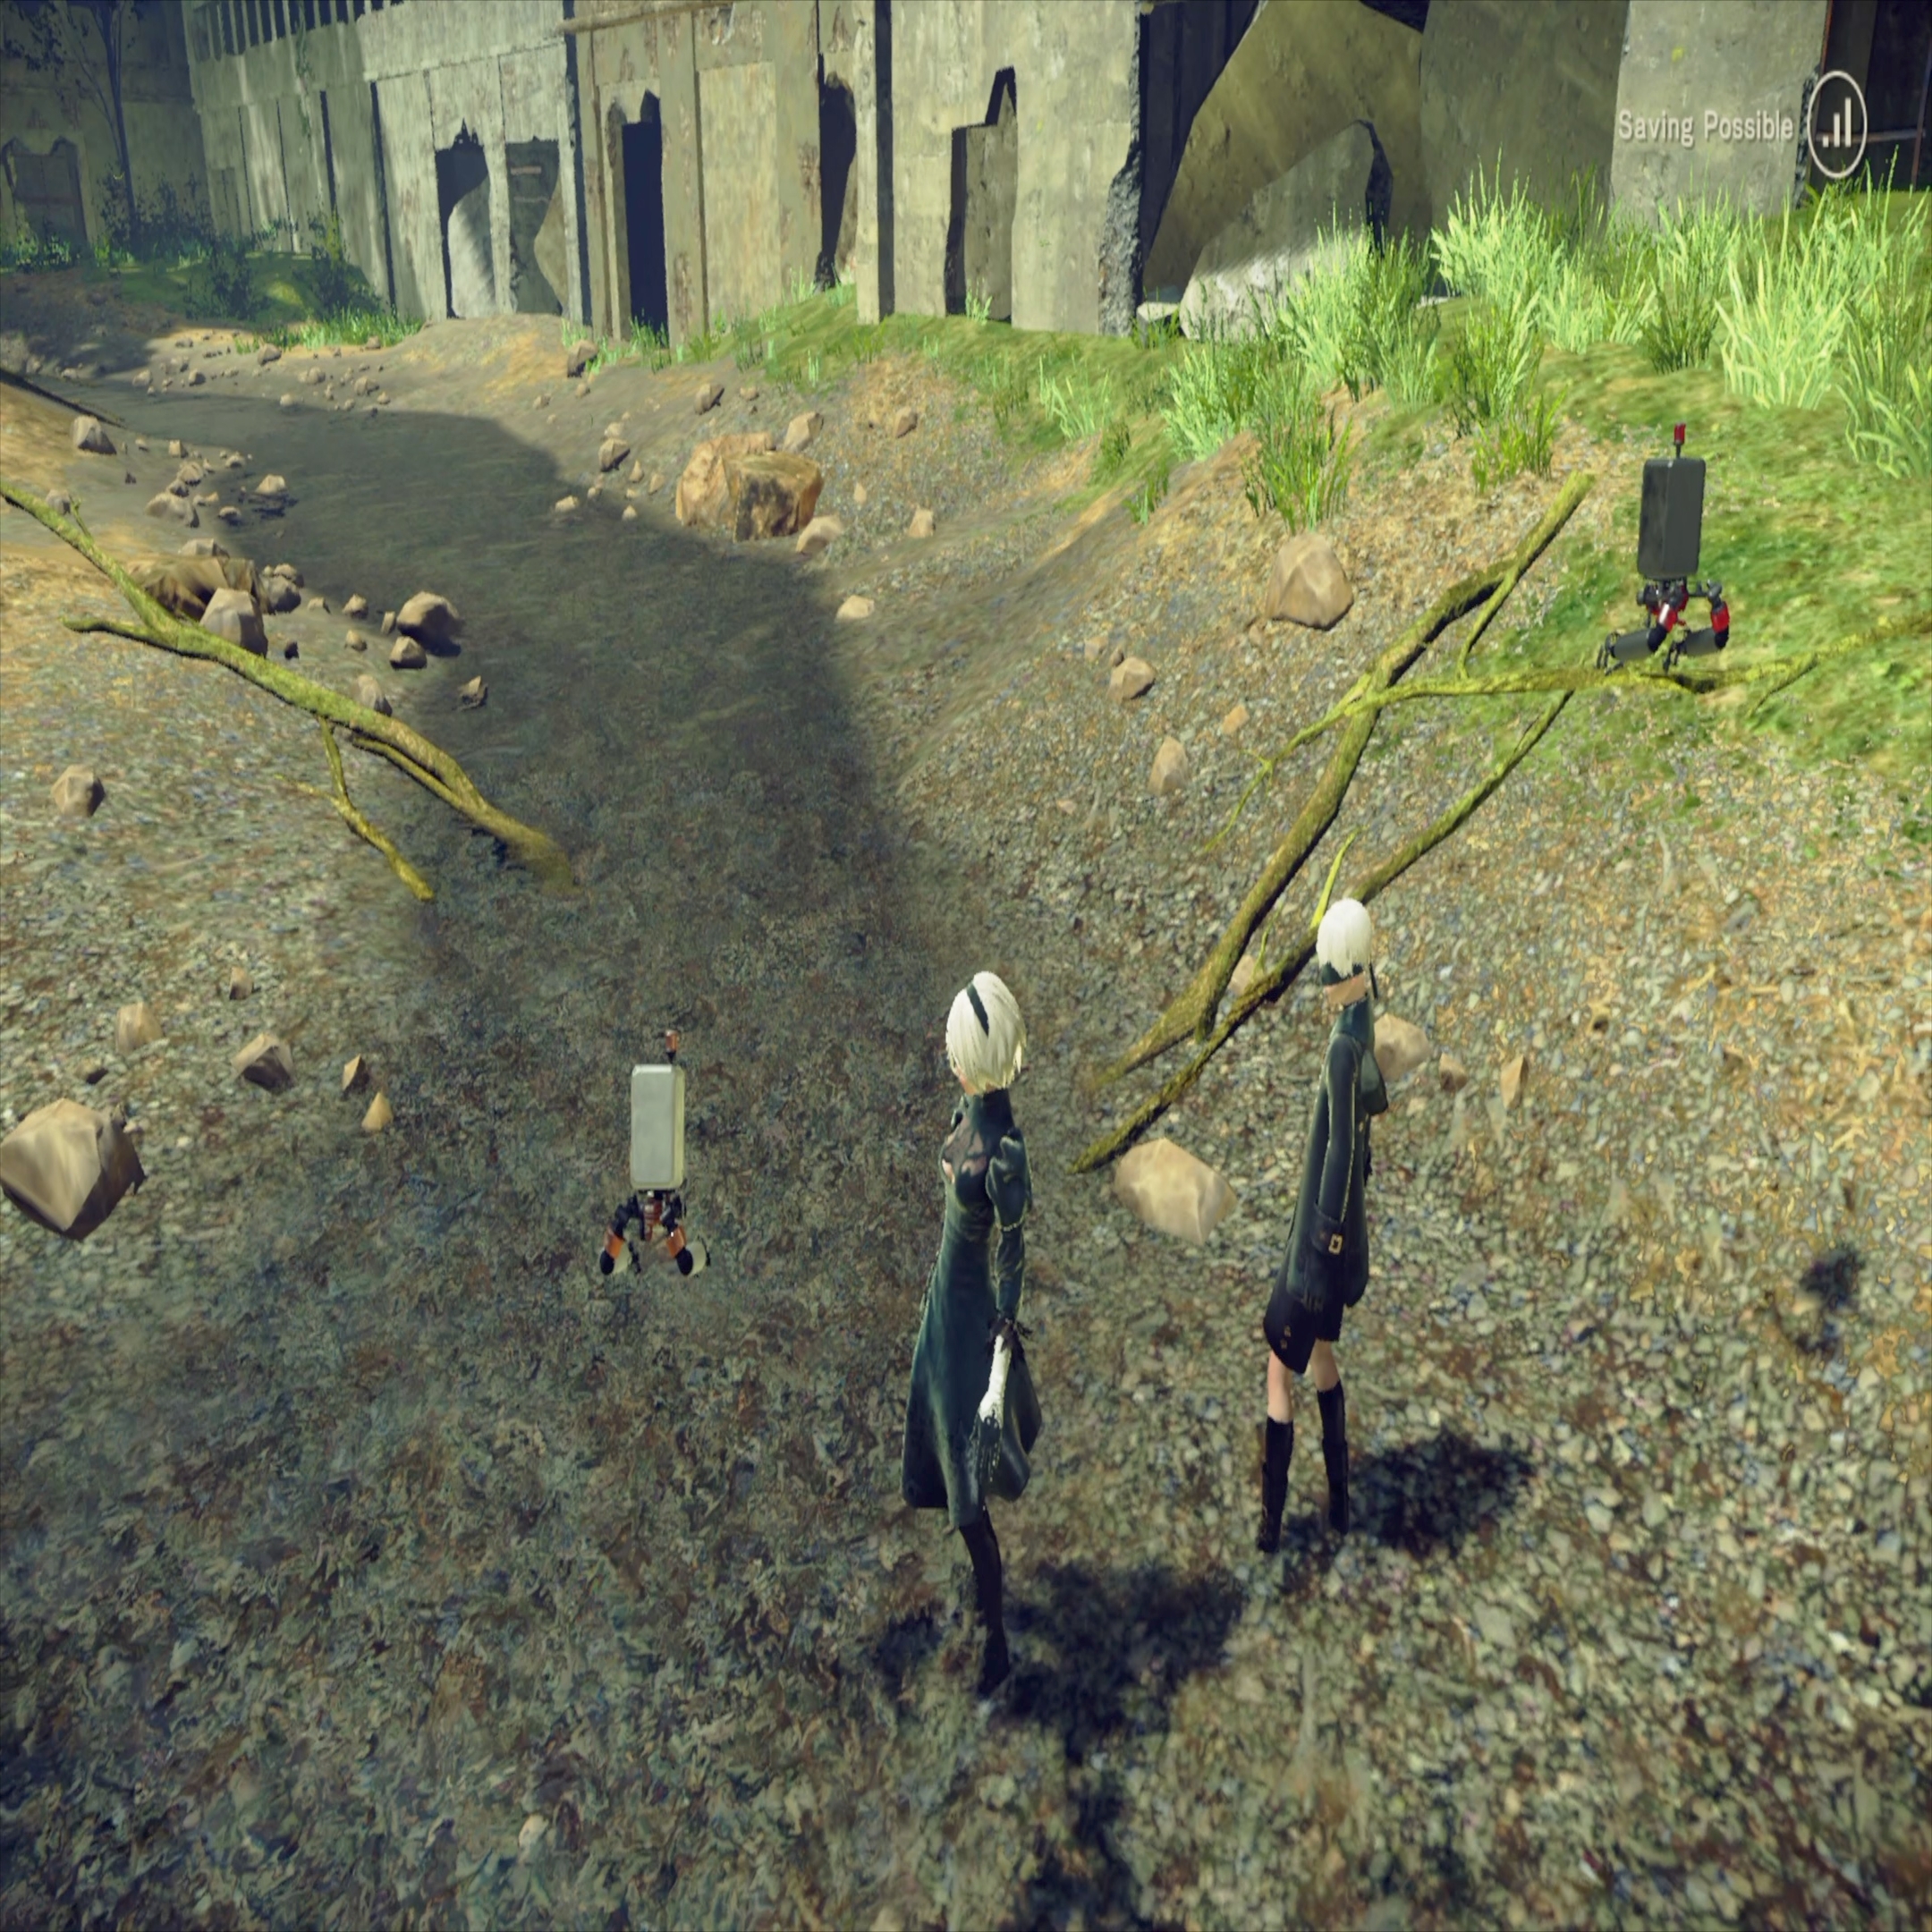 Nier Automata's Switch port is very impressive - but not quite